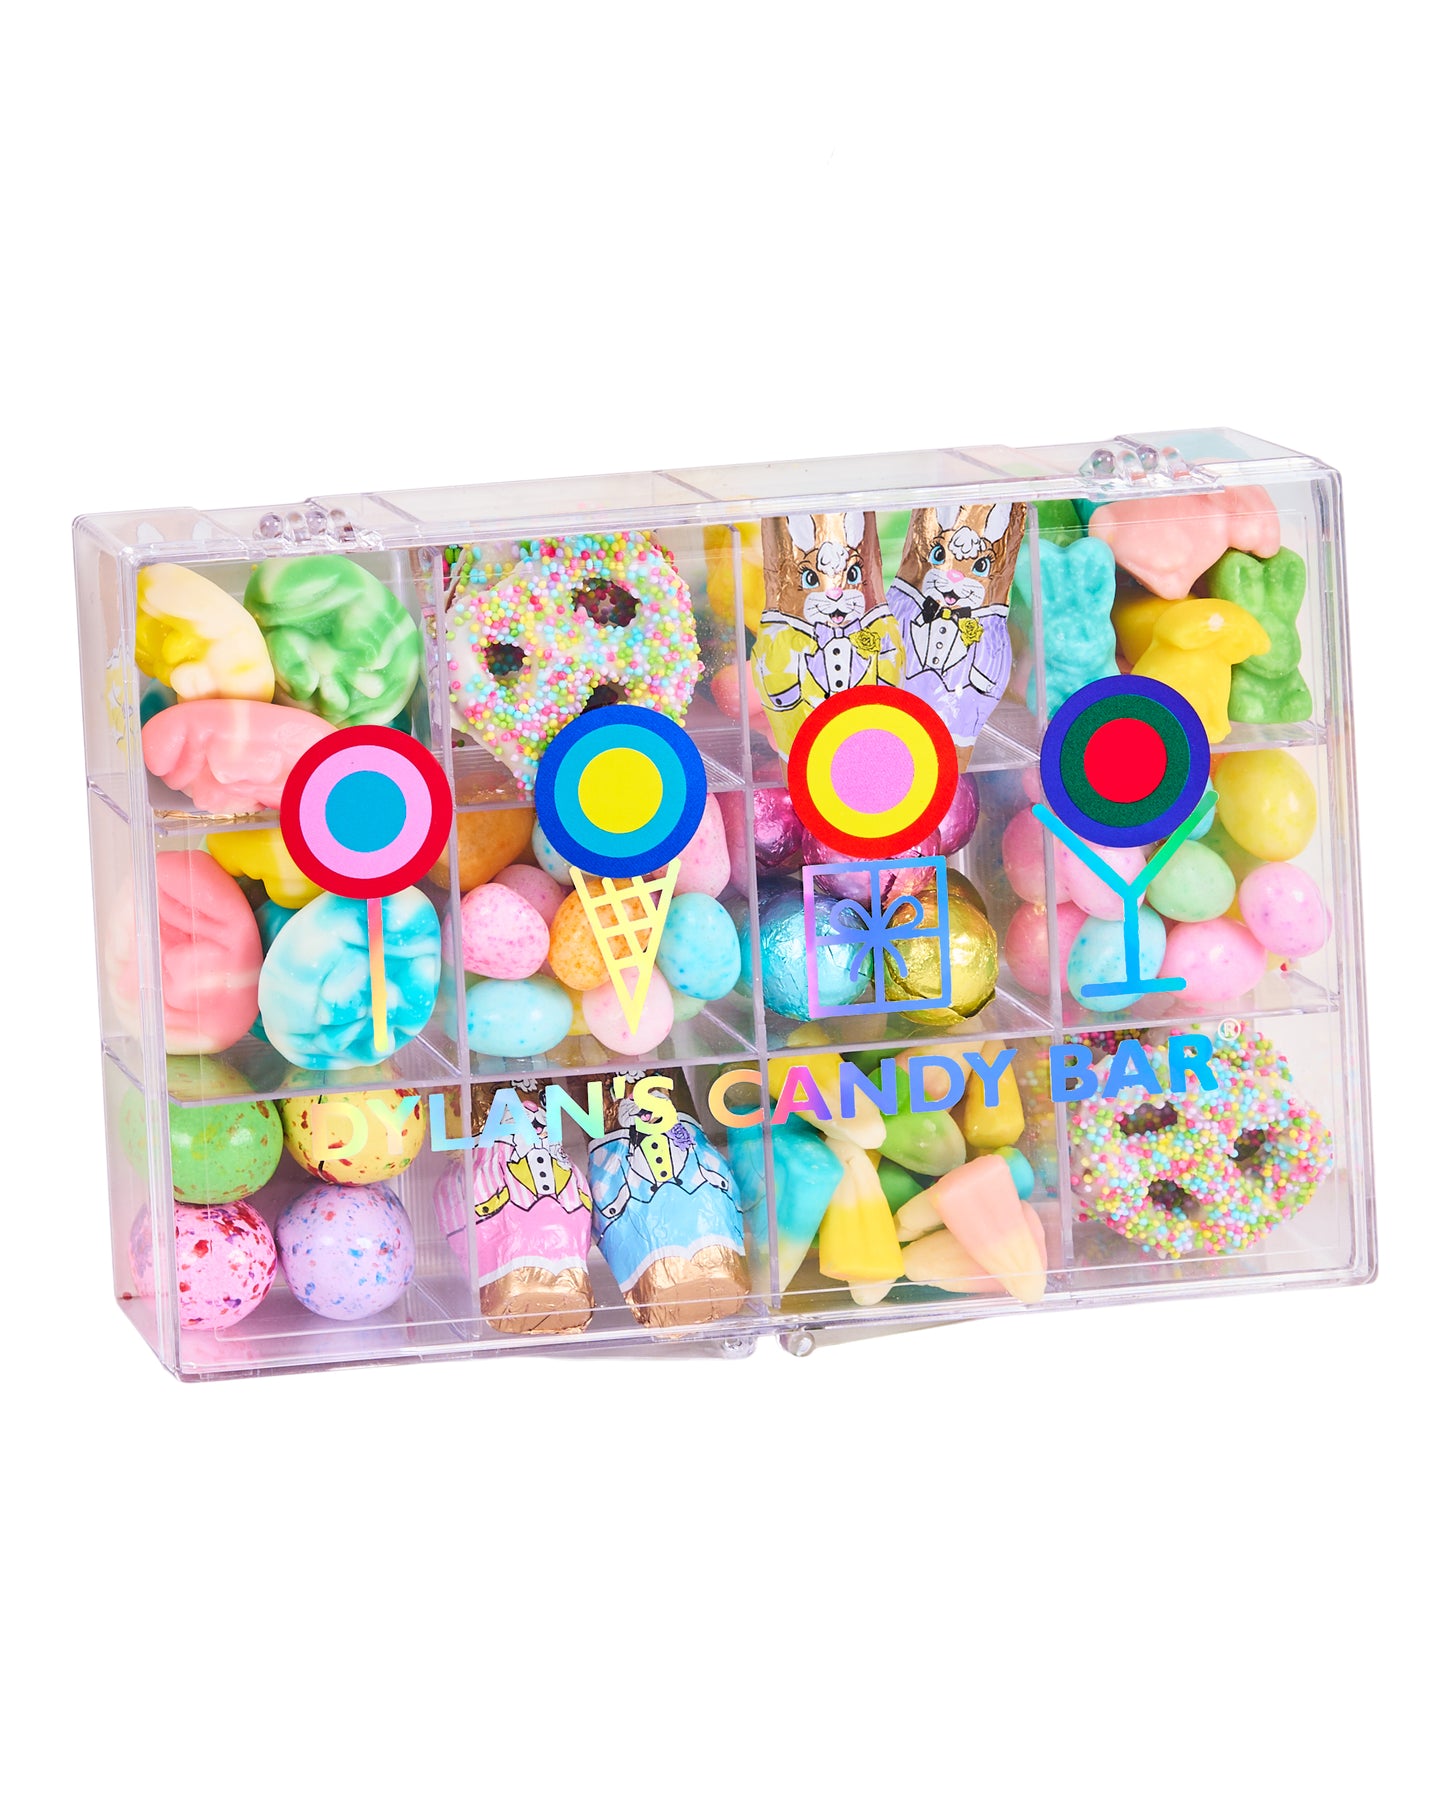 Sweetness of Spring Tackle Box - Dylan's Candy Bar